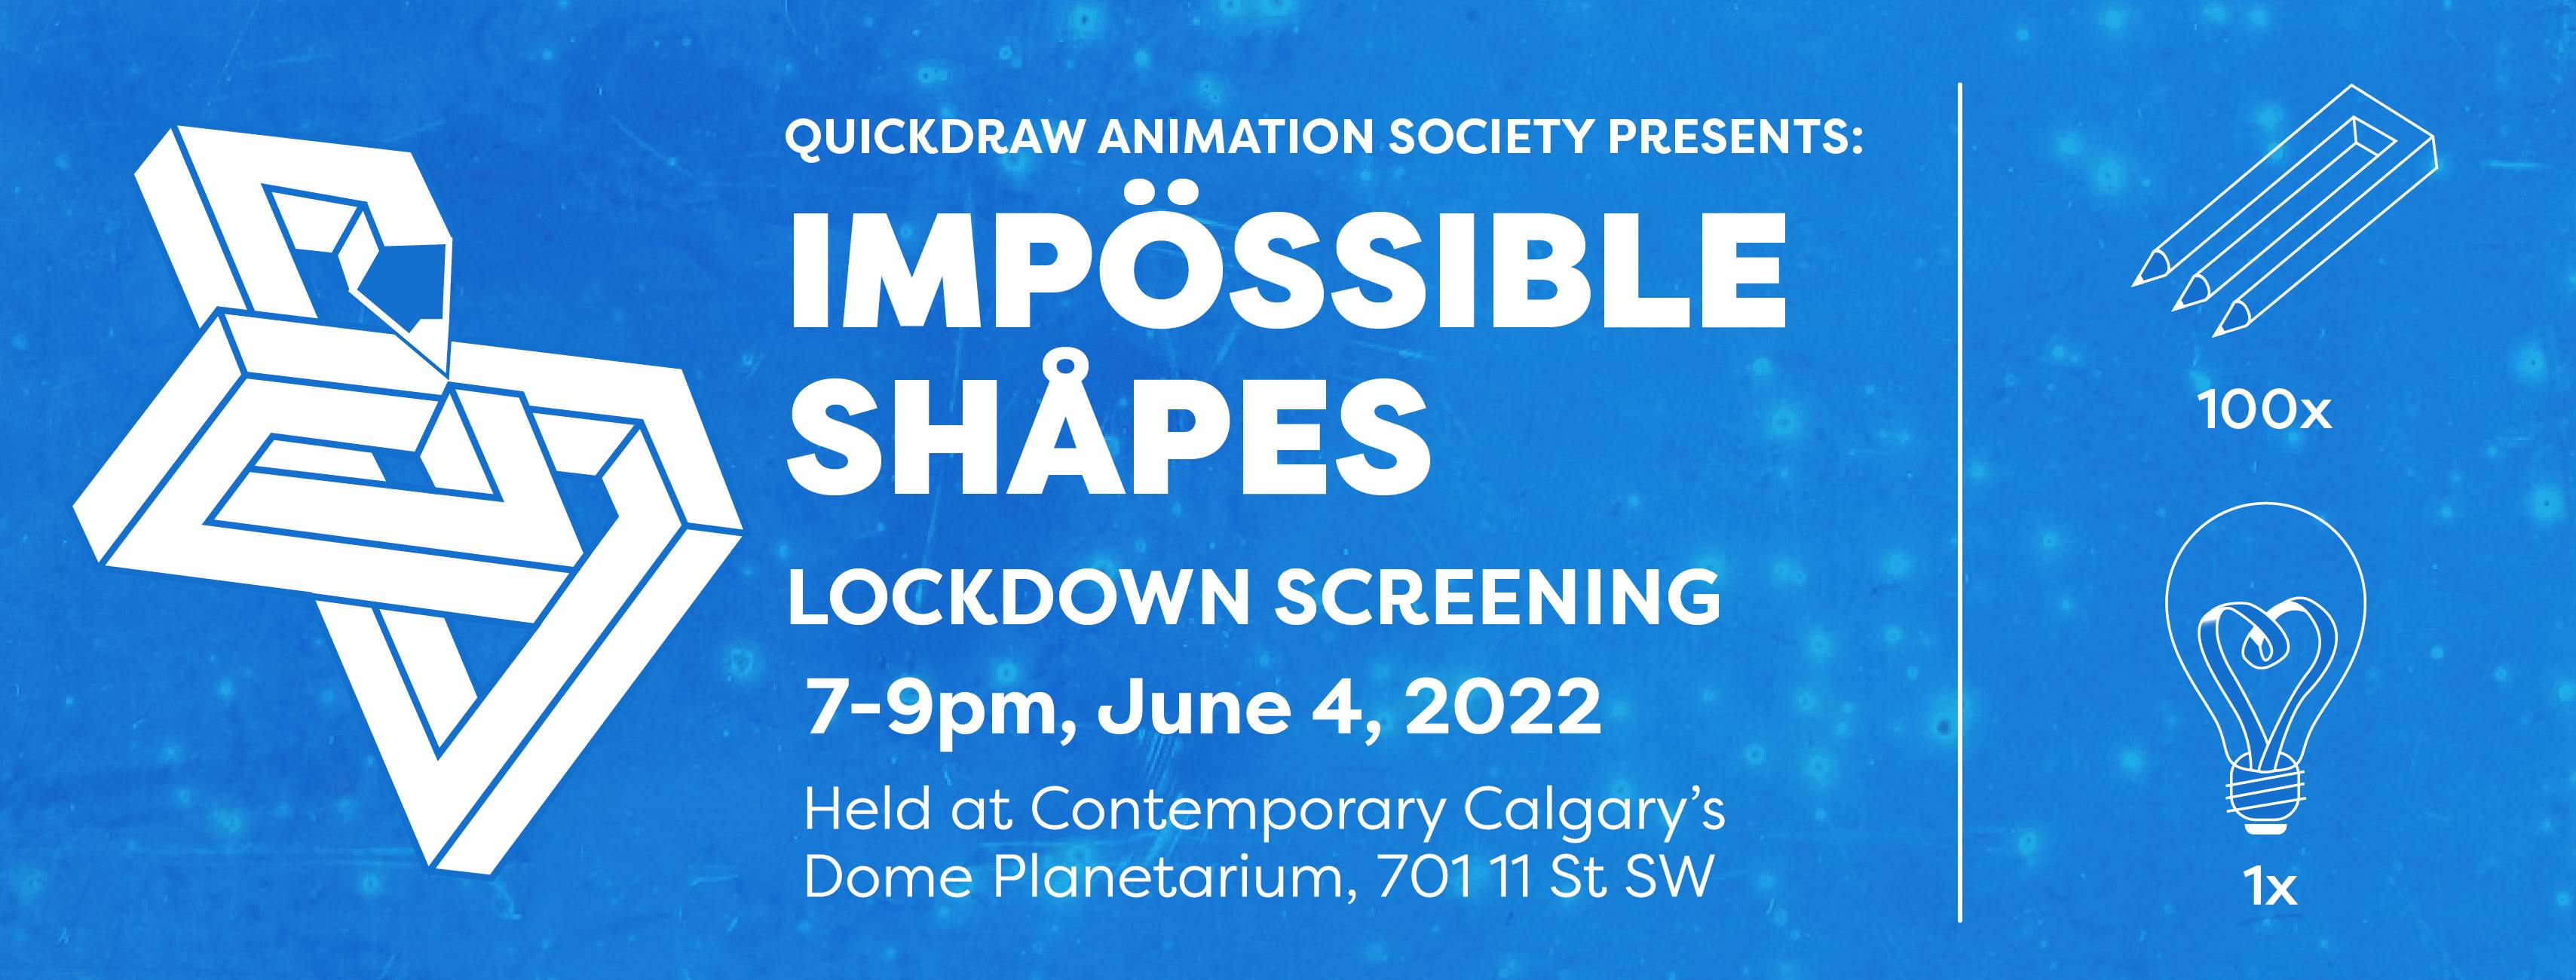 An "impossible shape" version of the Quickdraw pencil logo, with the text "Quickdraw Animation Society Presents: Impossible Shapes Lockdown Screening; 7-9pm, June 4, 2022; Held at Contemporary Calgary's Dome Planetarium, 701 11 St SW"